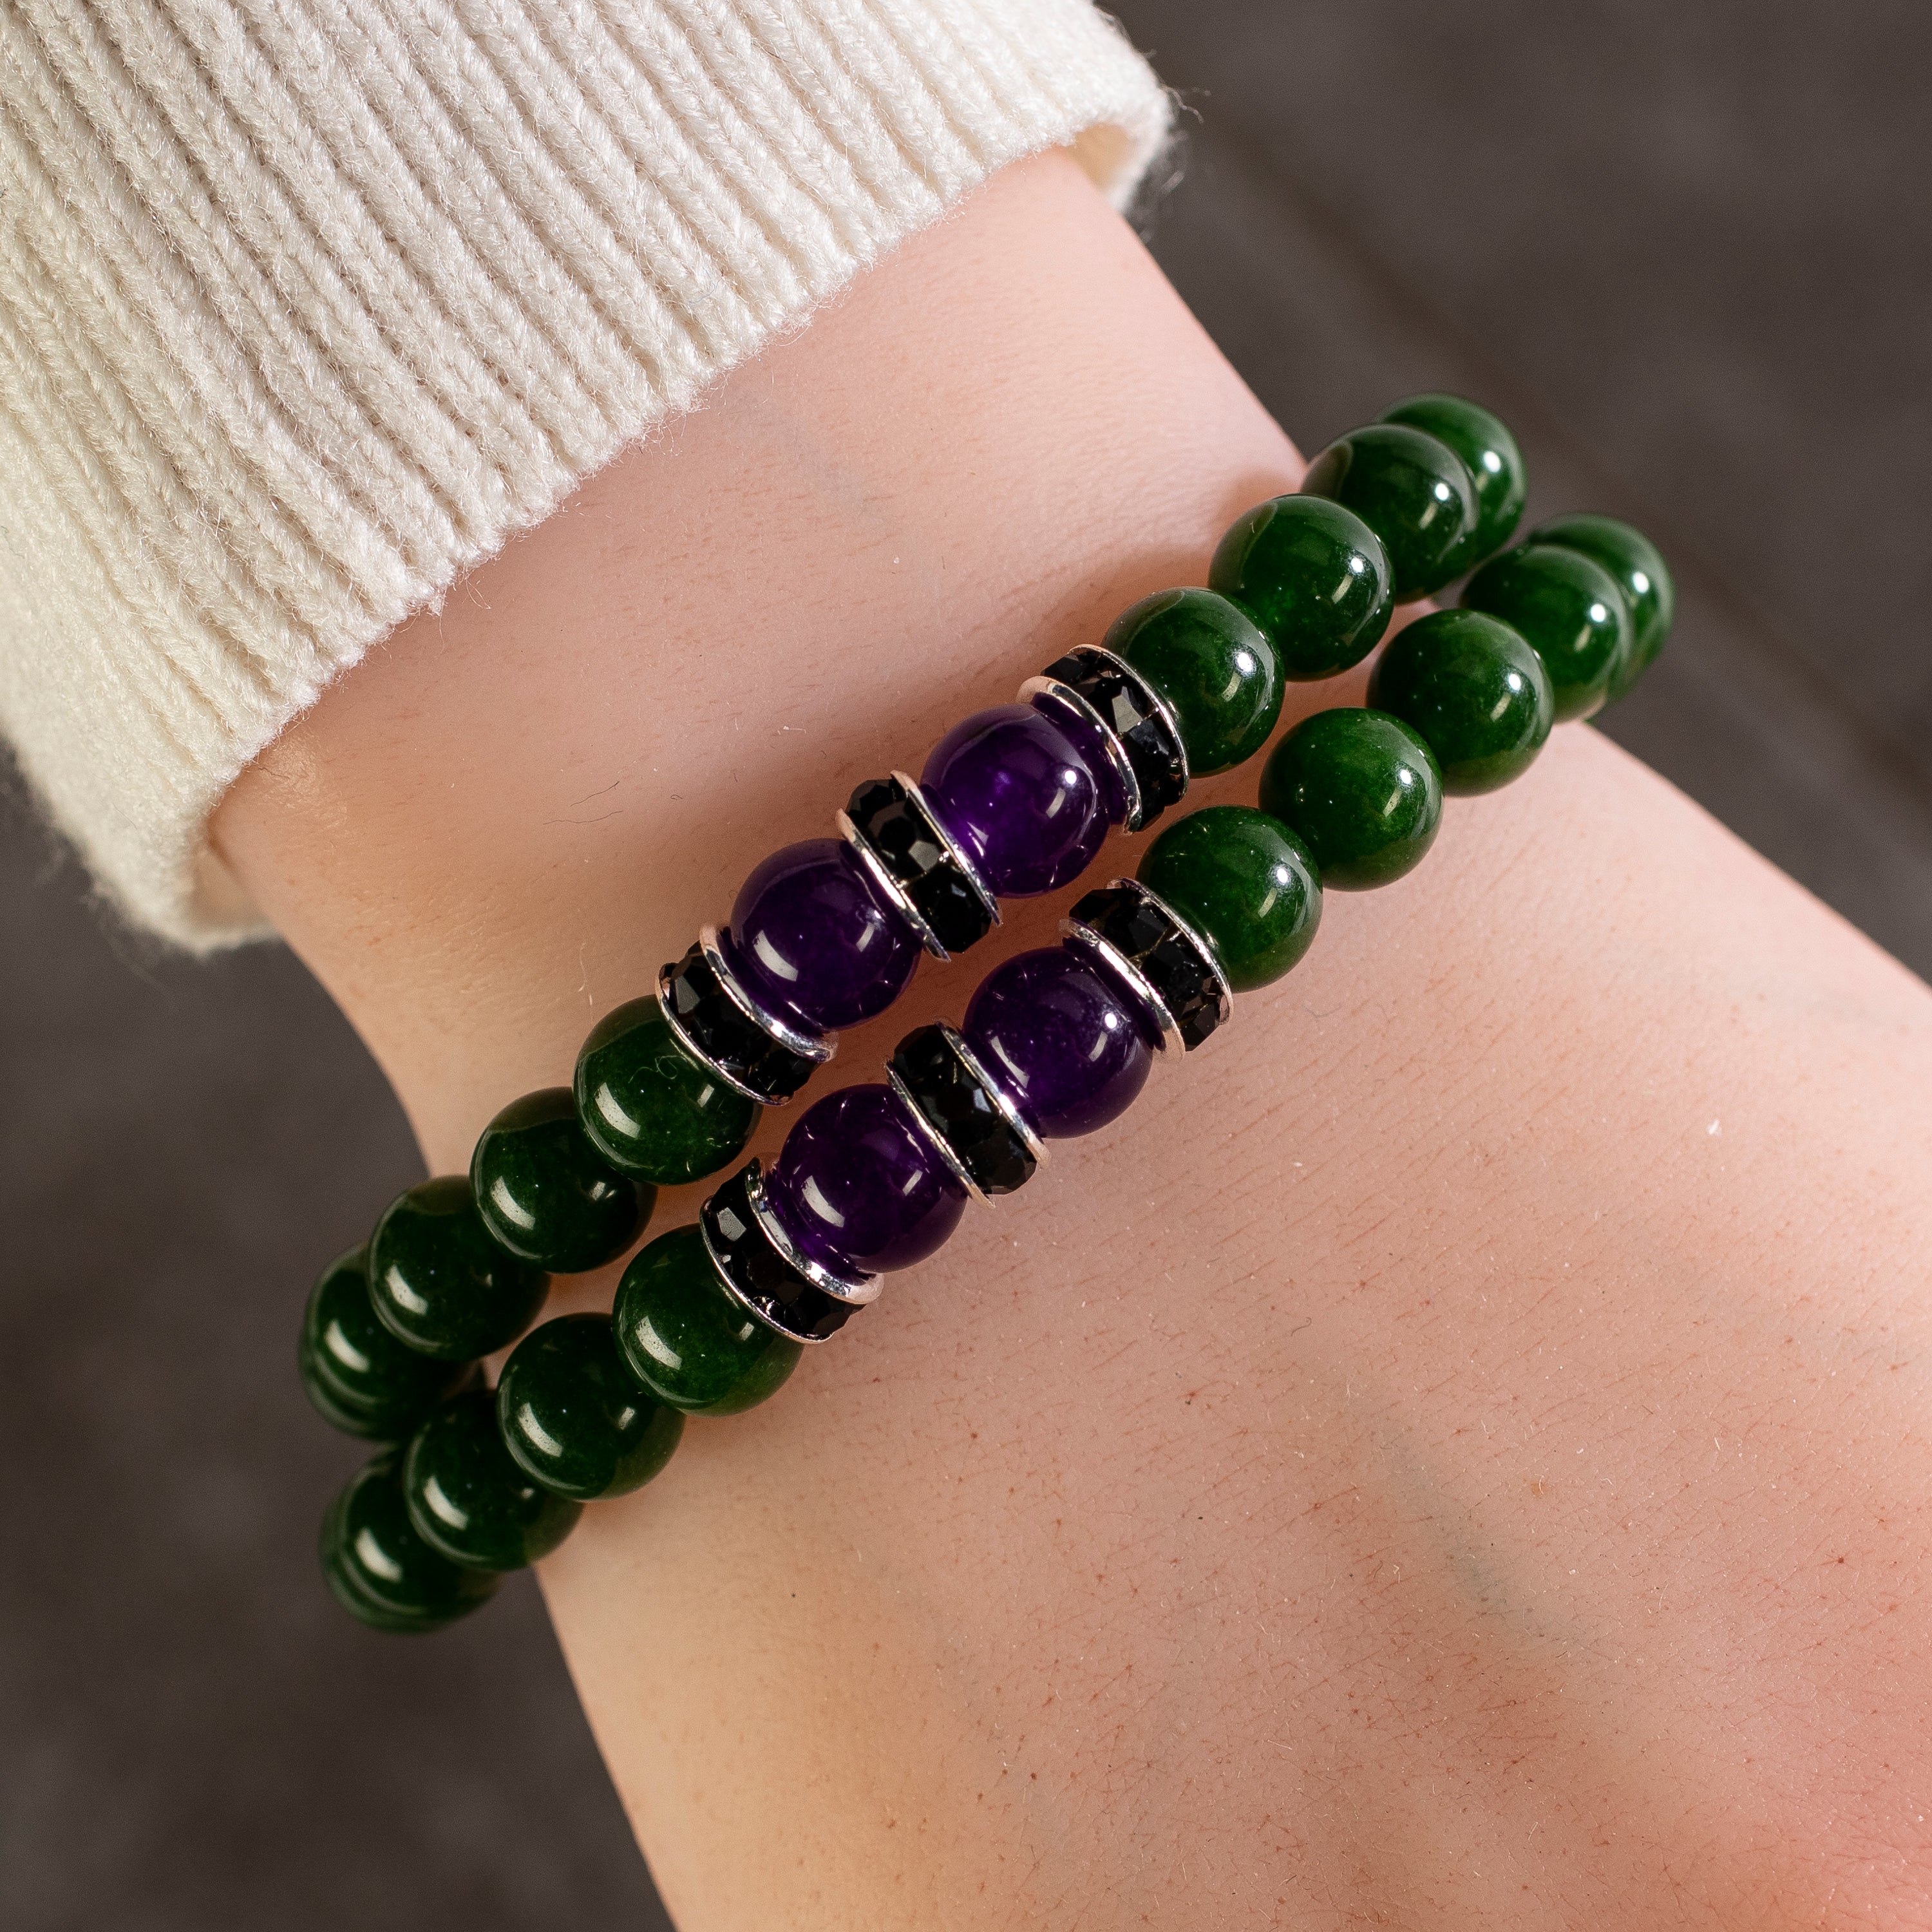 Aventurine  8mm Beads with Amethyst and Black and Silver Accent Beads Double Wrap Elastic Gemstone Bracelet